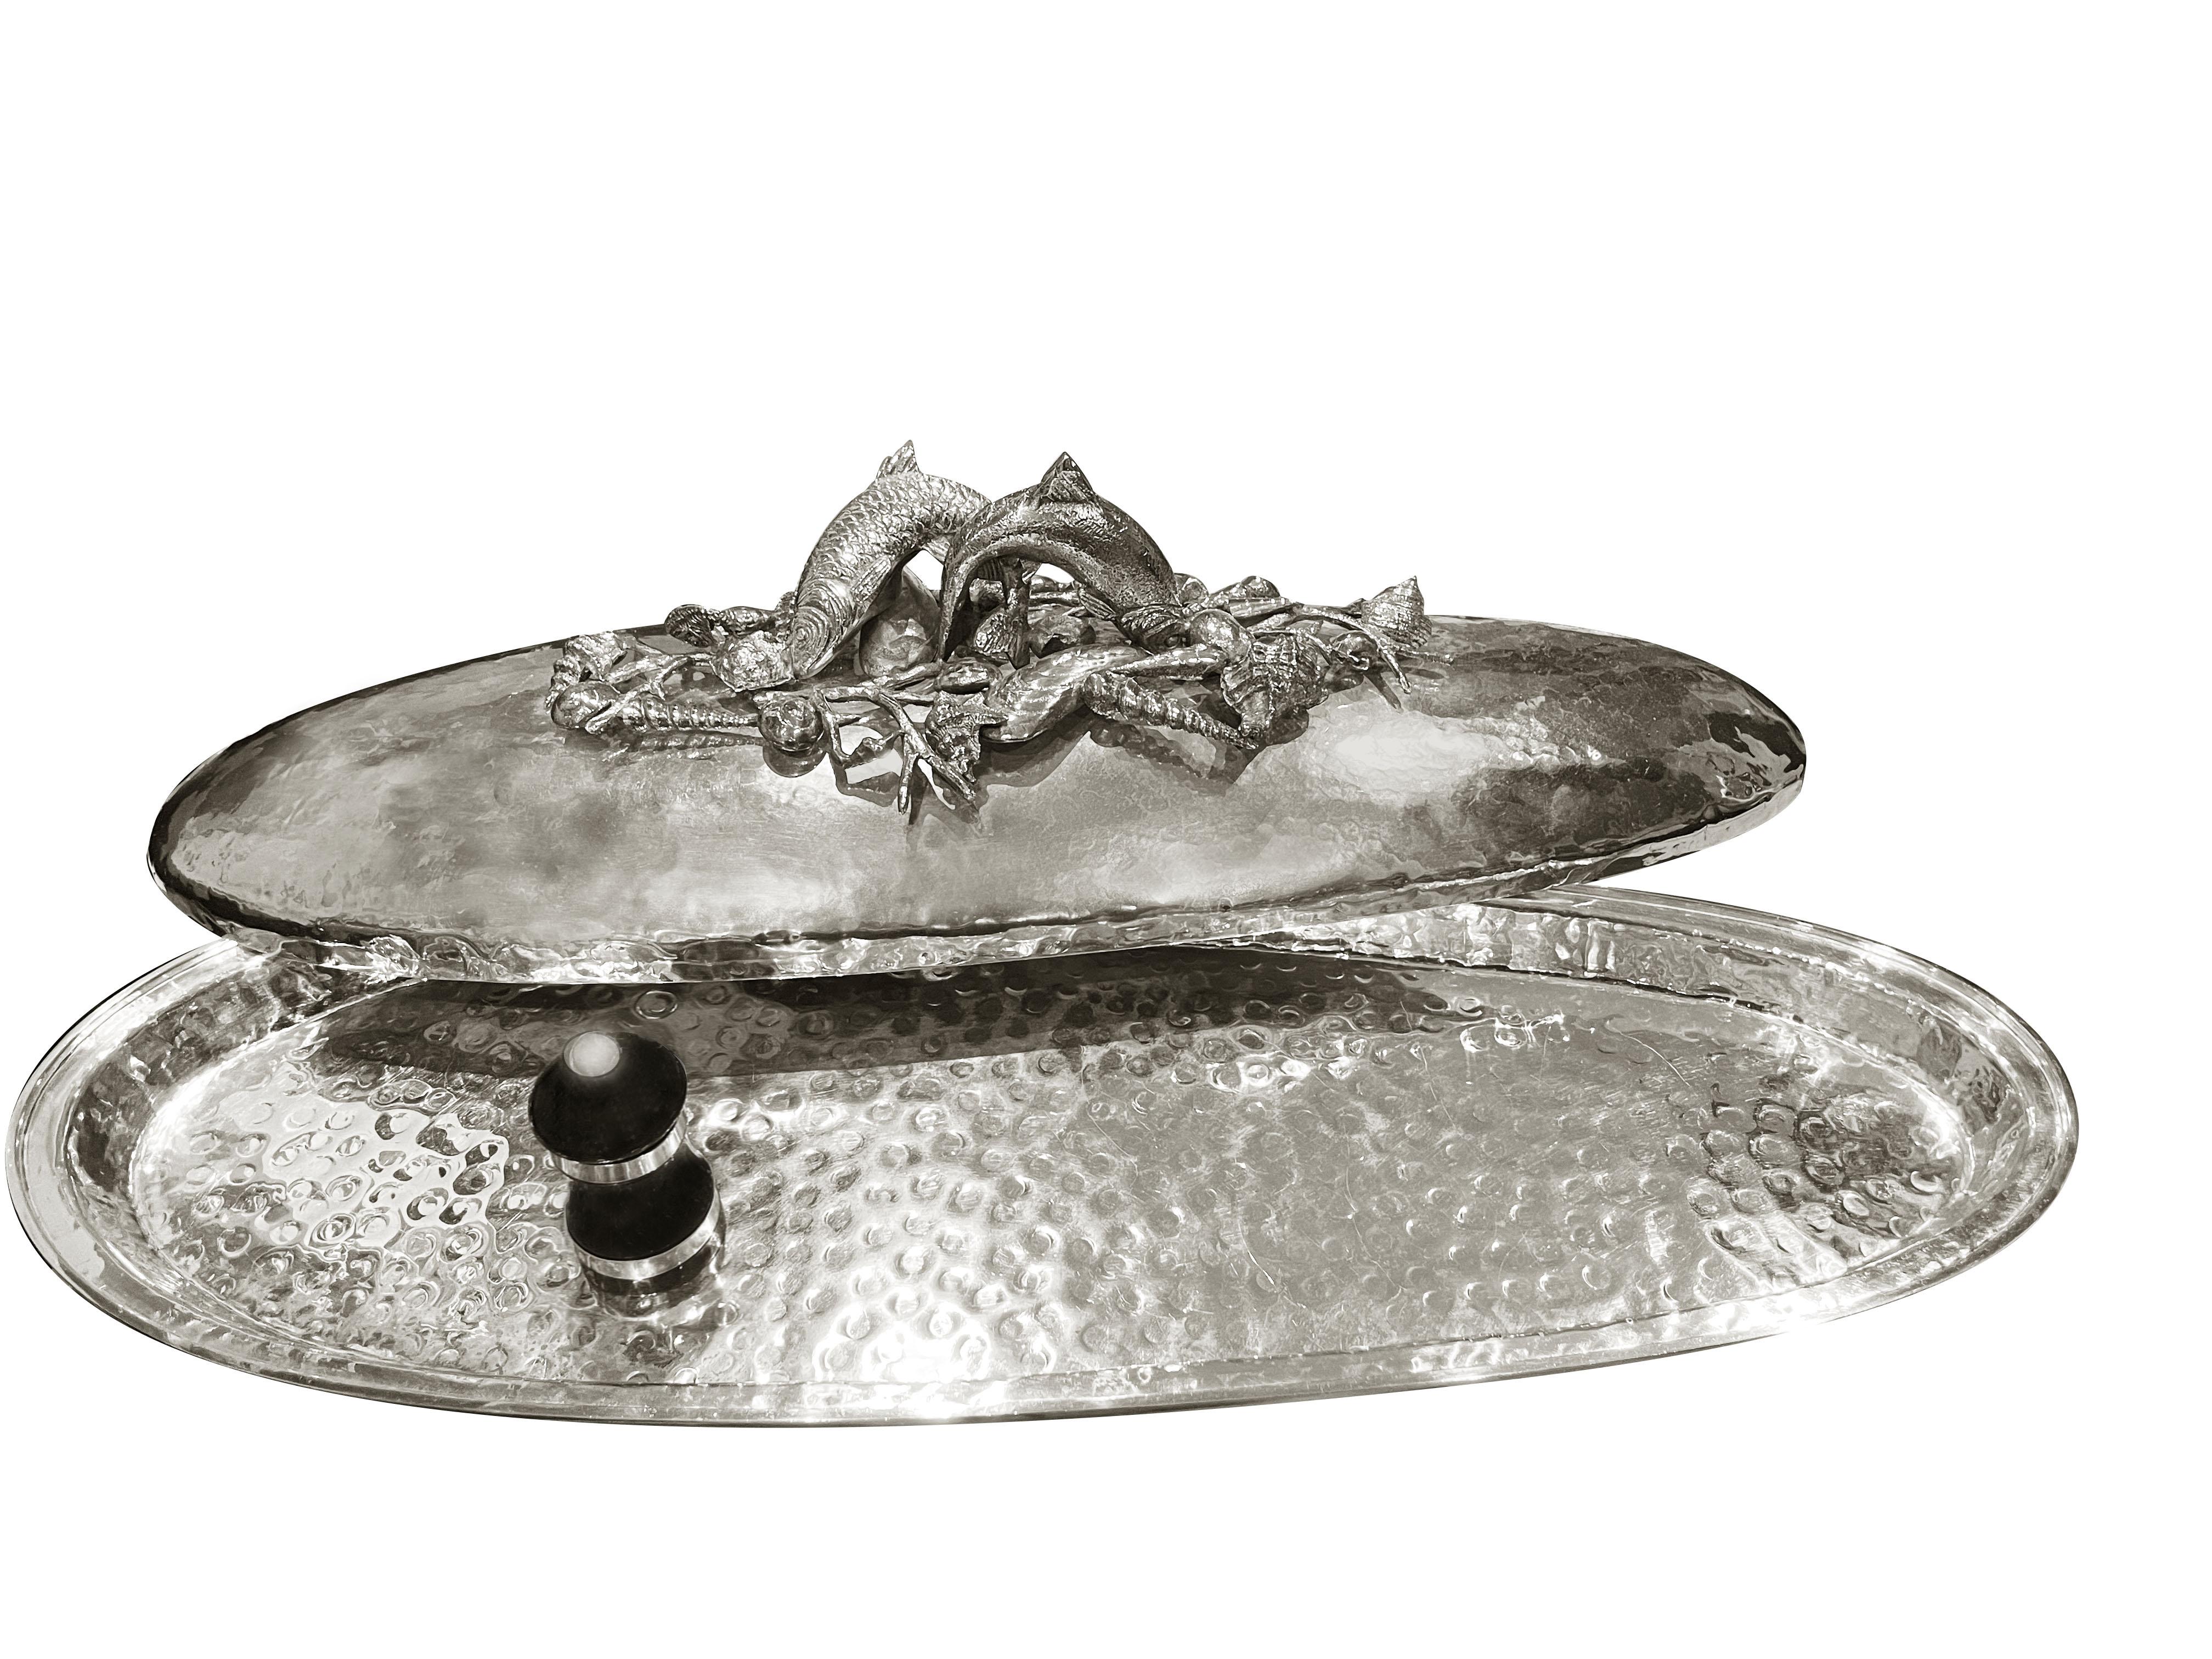 Stunning silver-plated hand-hammered fish platter with sea world decorations: fishes, sea stars, sea horses, and shells are decorating the lid and will magnify your tables.
Work attributed to Franco Lapini specialized in this kind of very